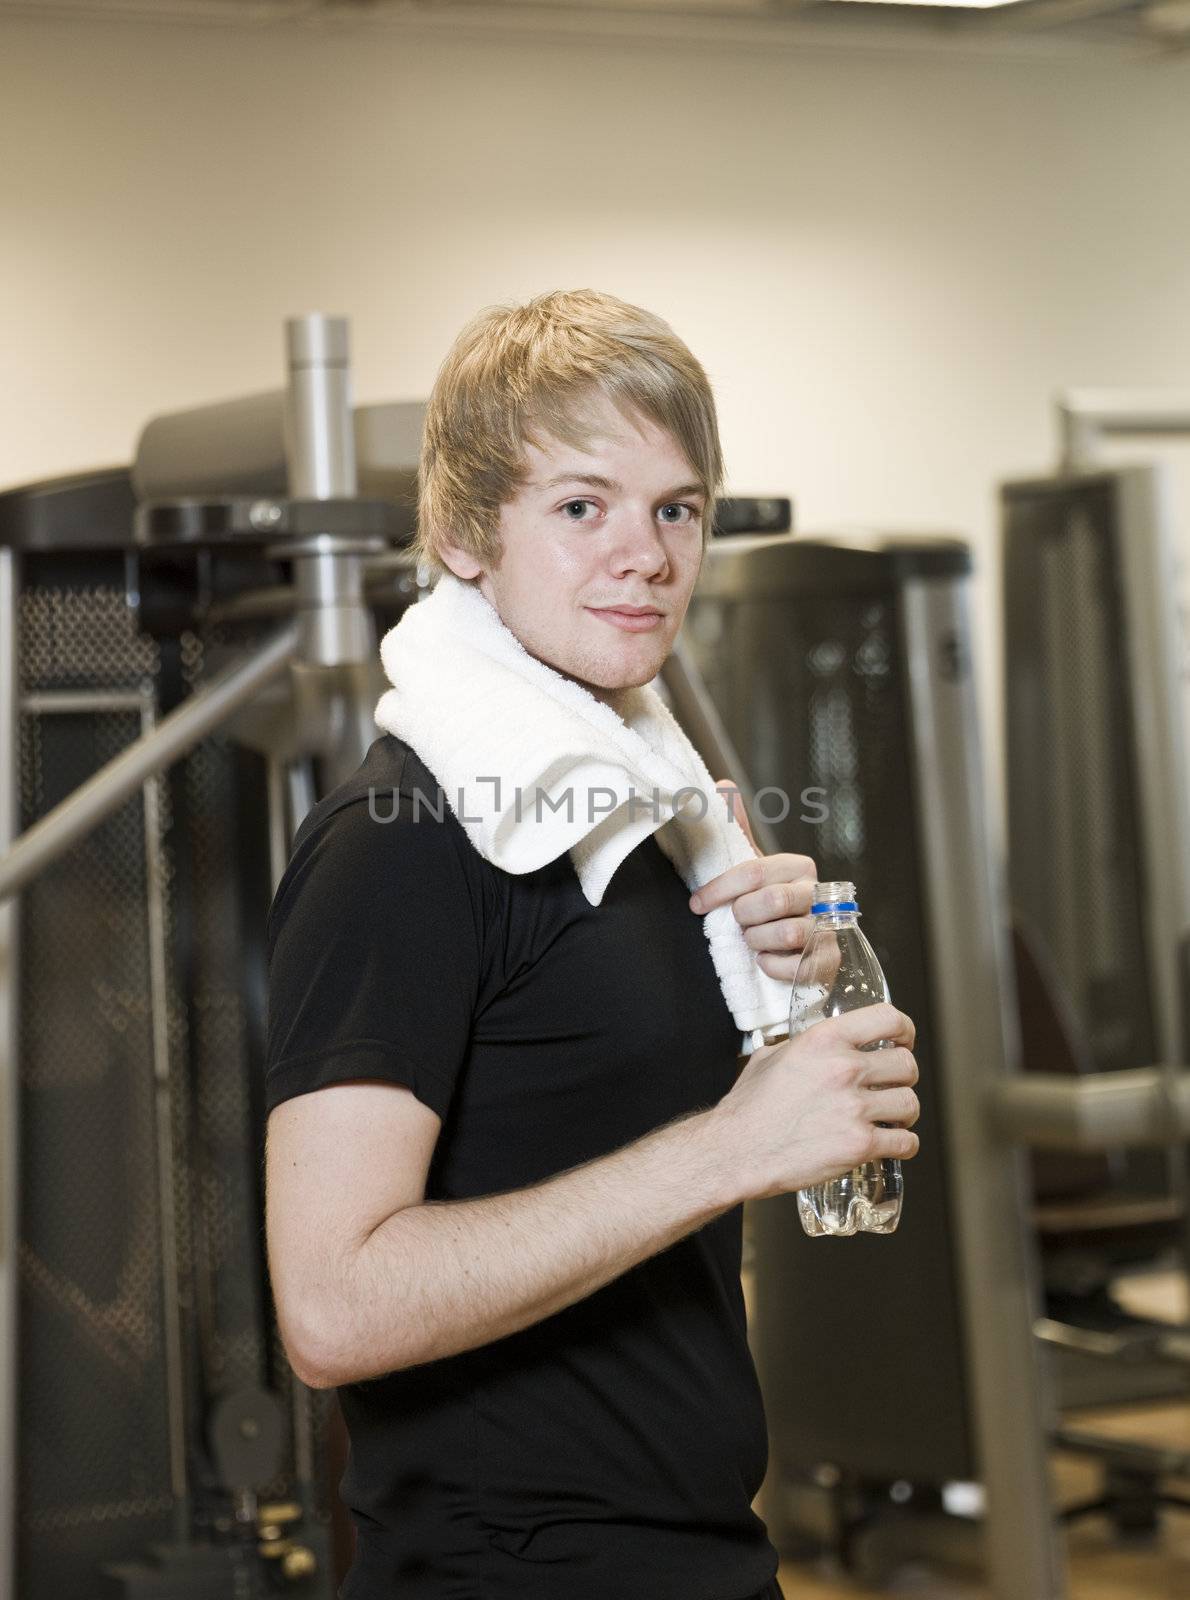 Portrait of a young man at a fitness center